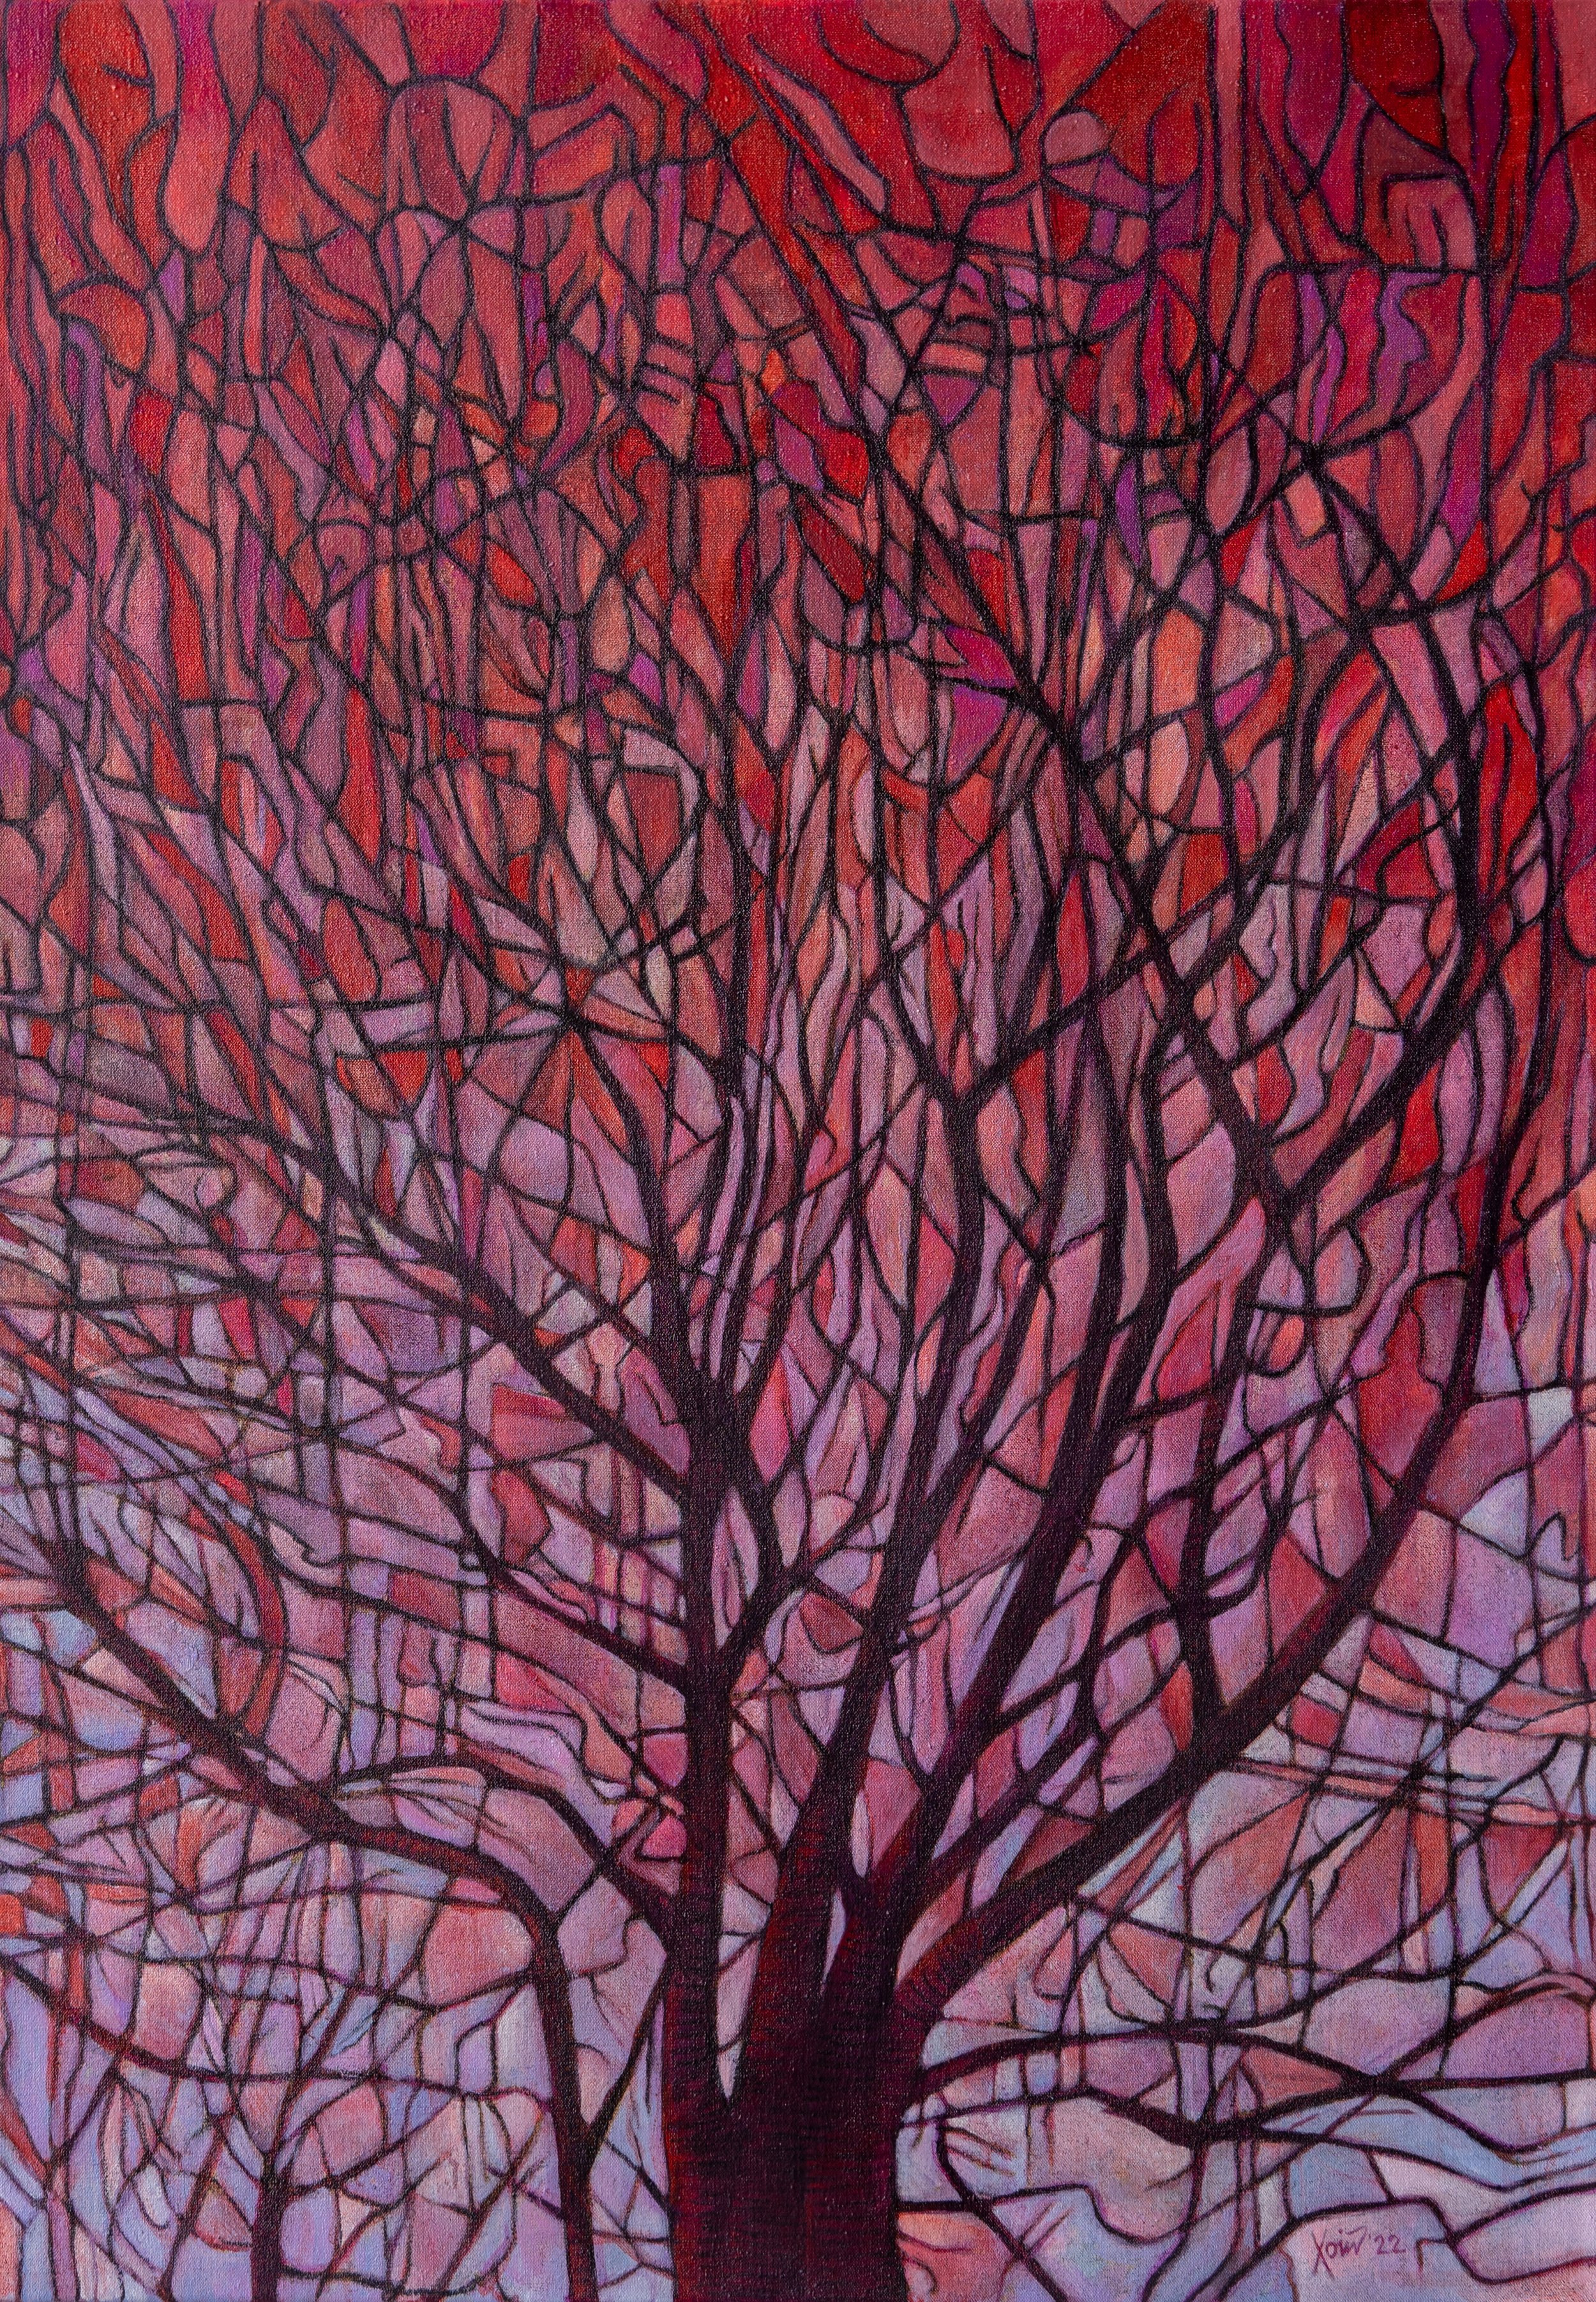 "Red tree" Oil/Charcoal on linen. 2022